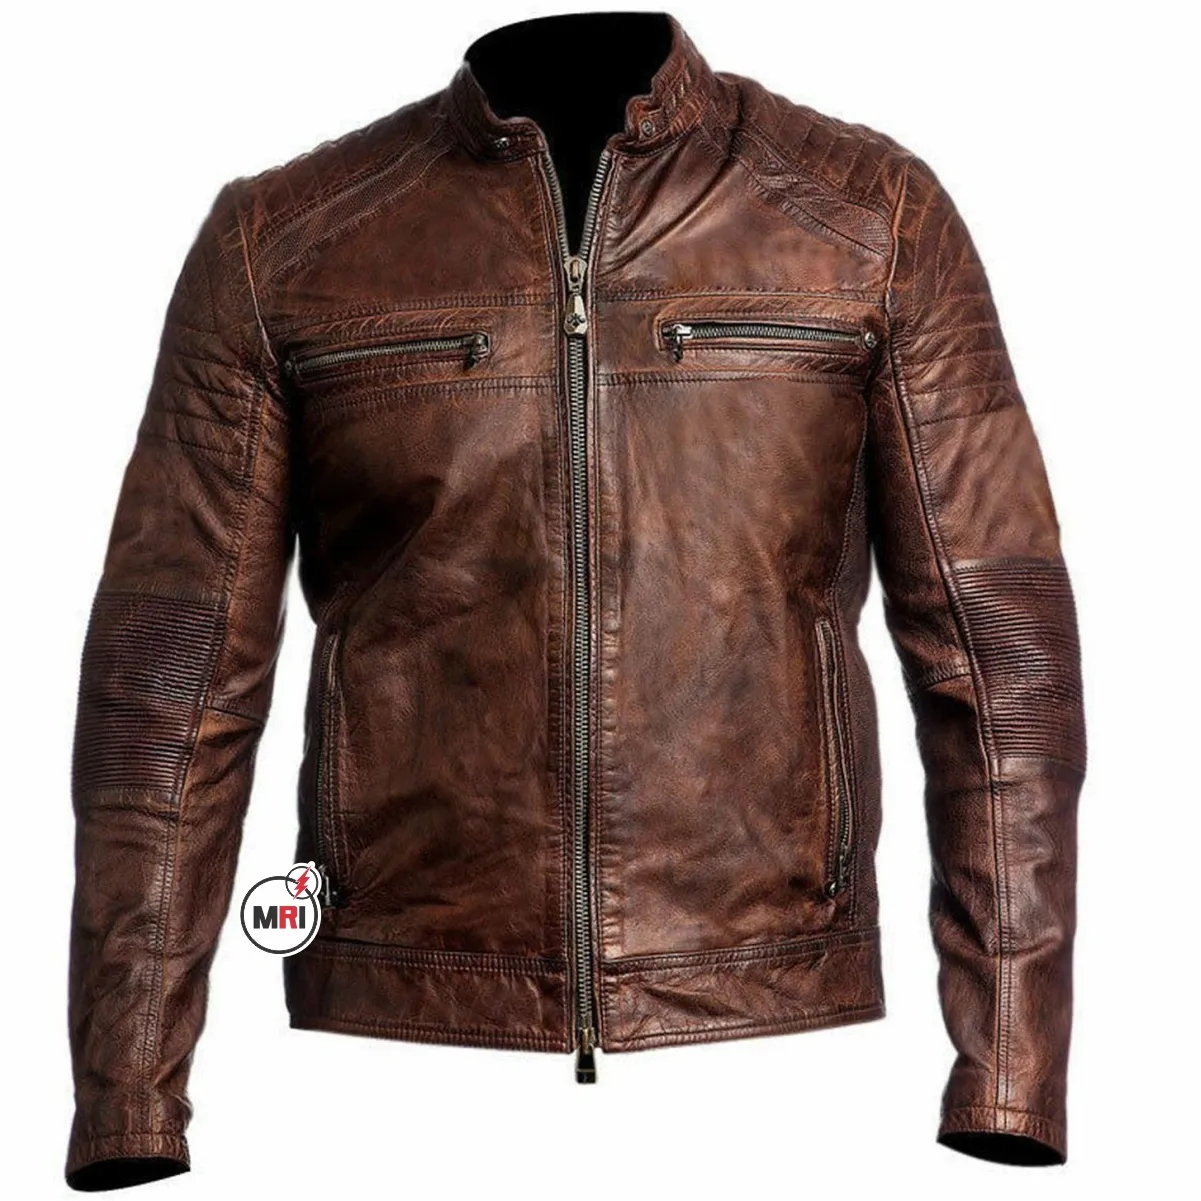 Men's waterproof blank leather textile motorbike jacket best quality motorcycle leather jacket Brand New Wholesale PU Leather